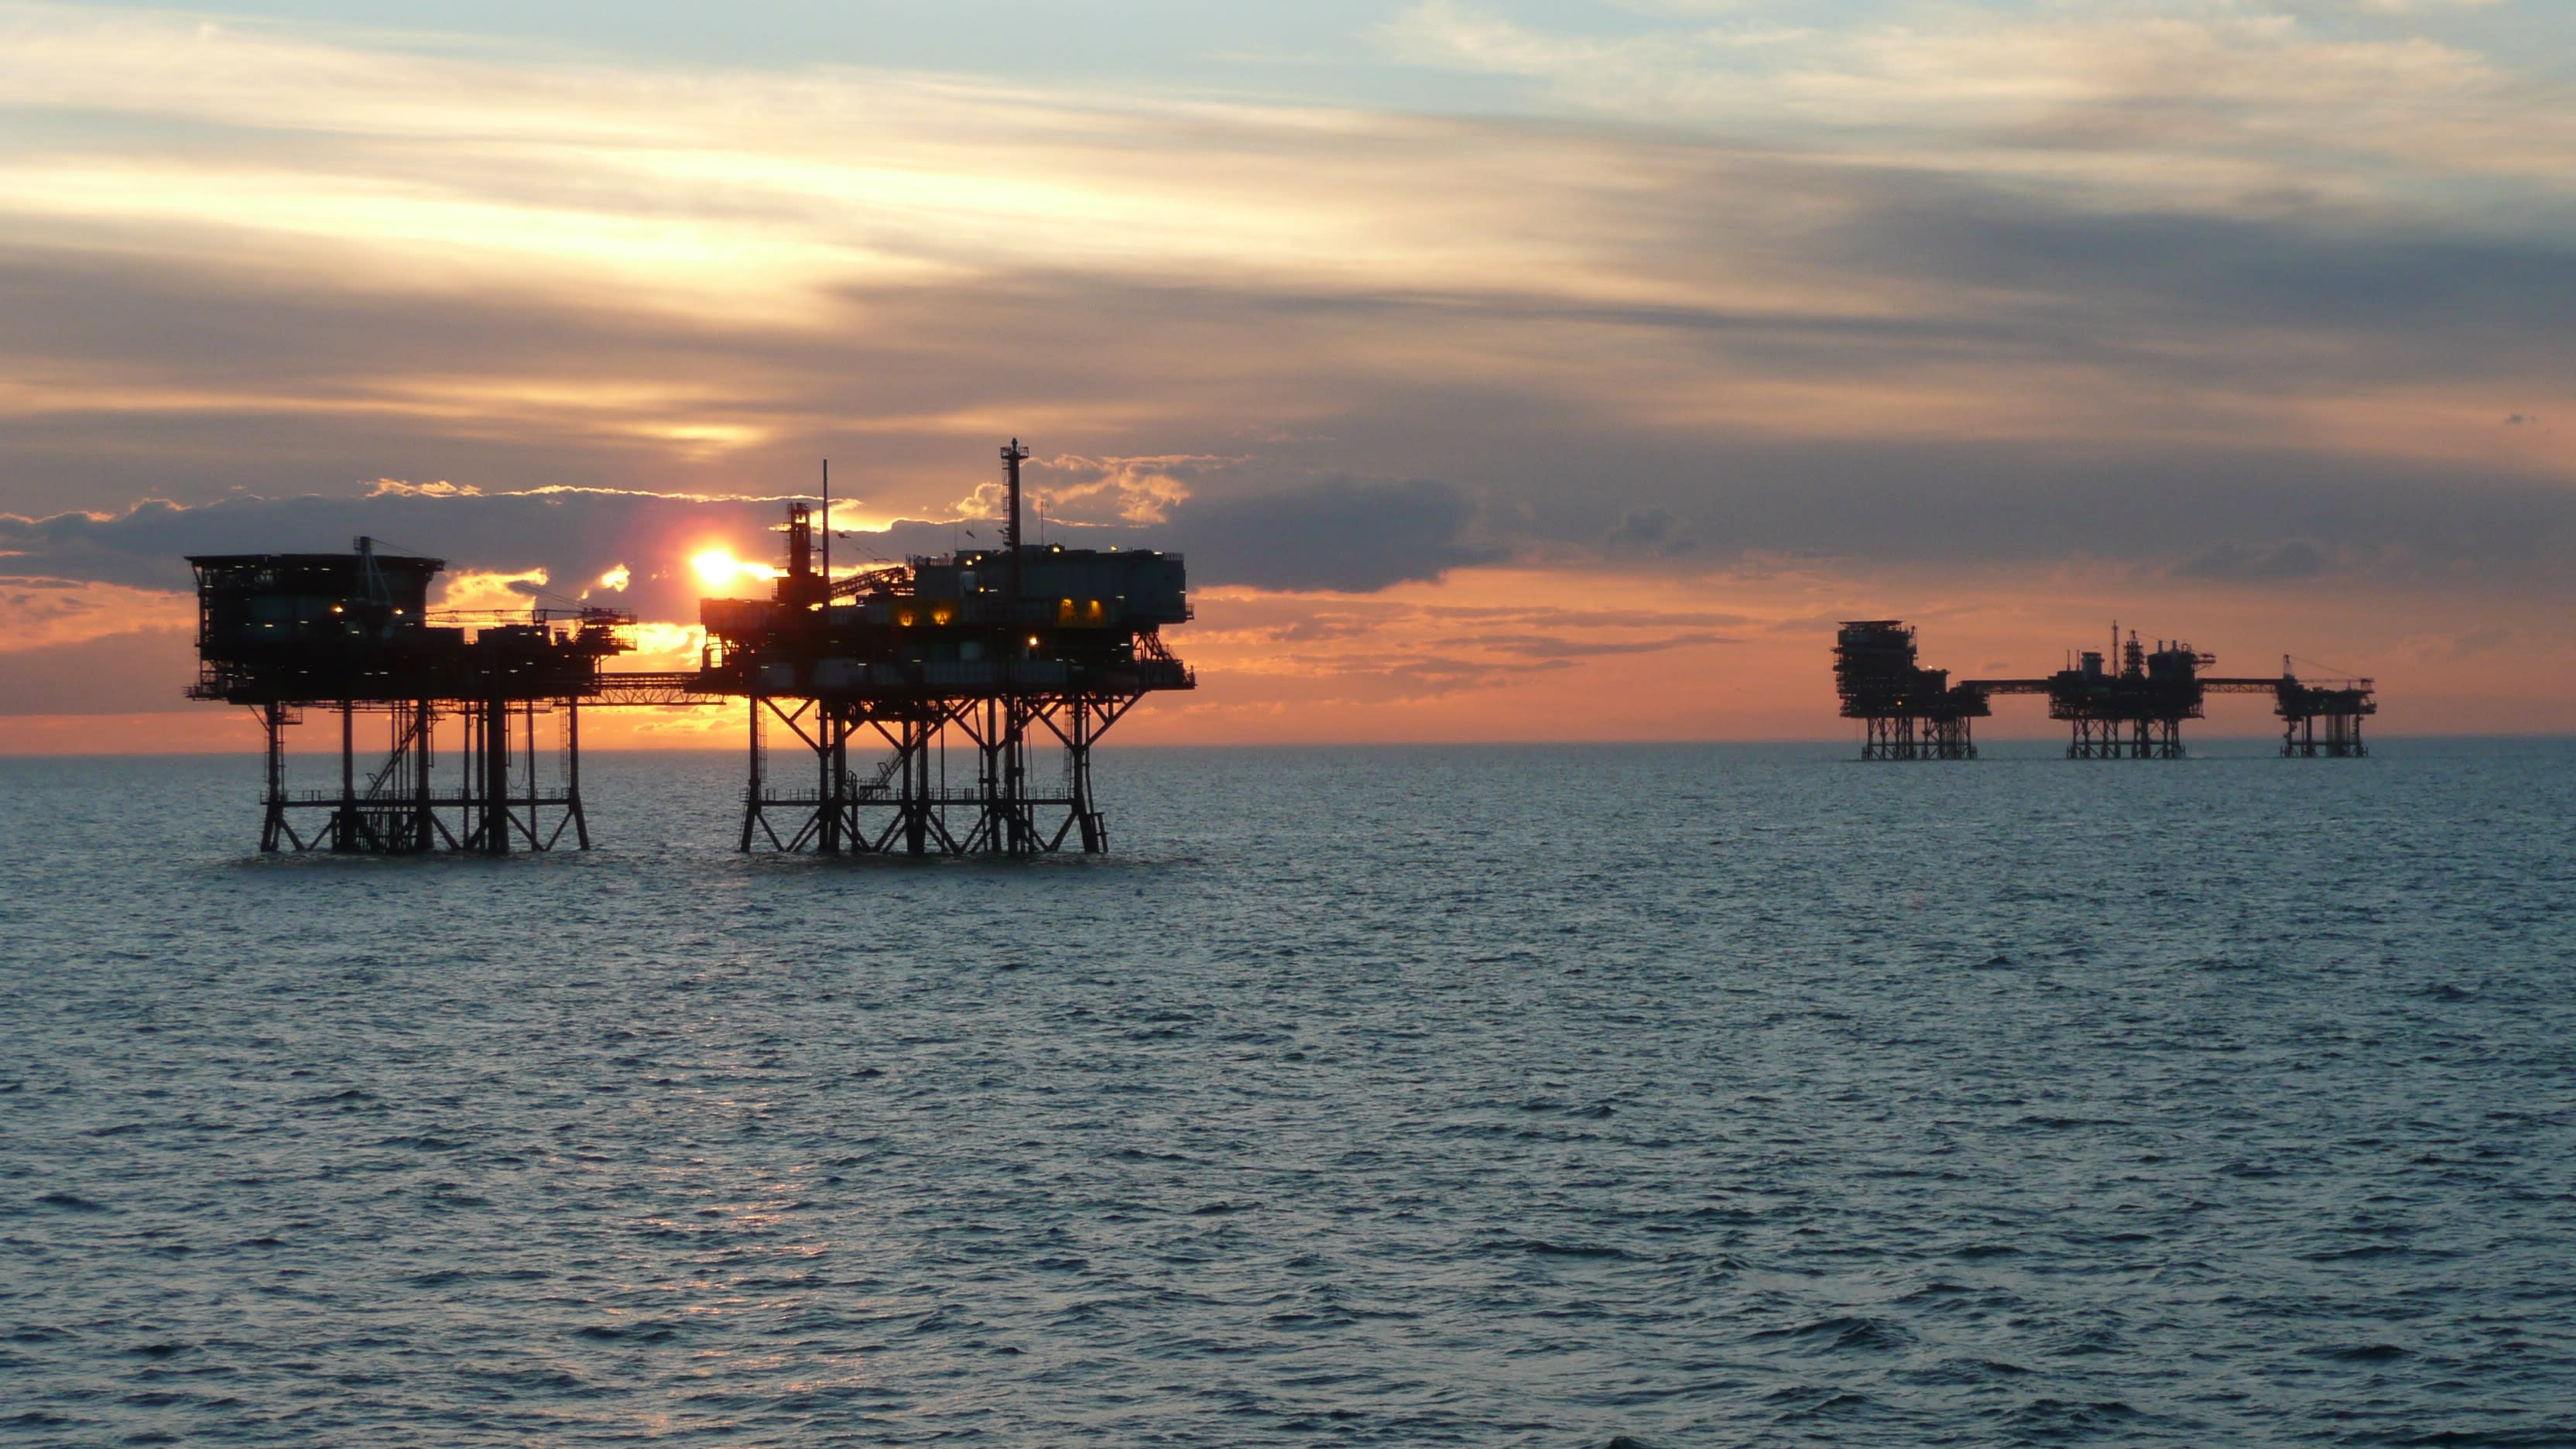 Sea at sunset with rough gas storage structures